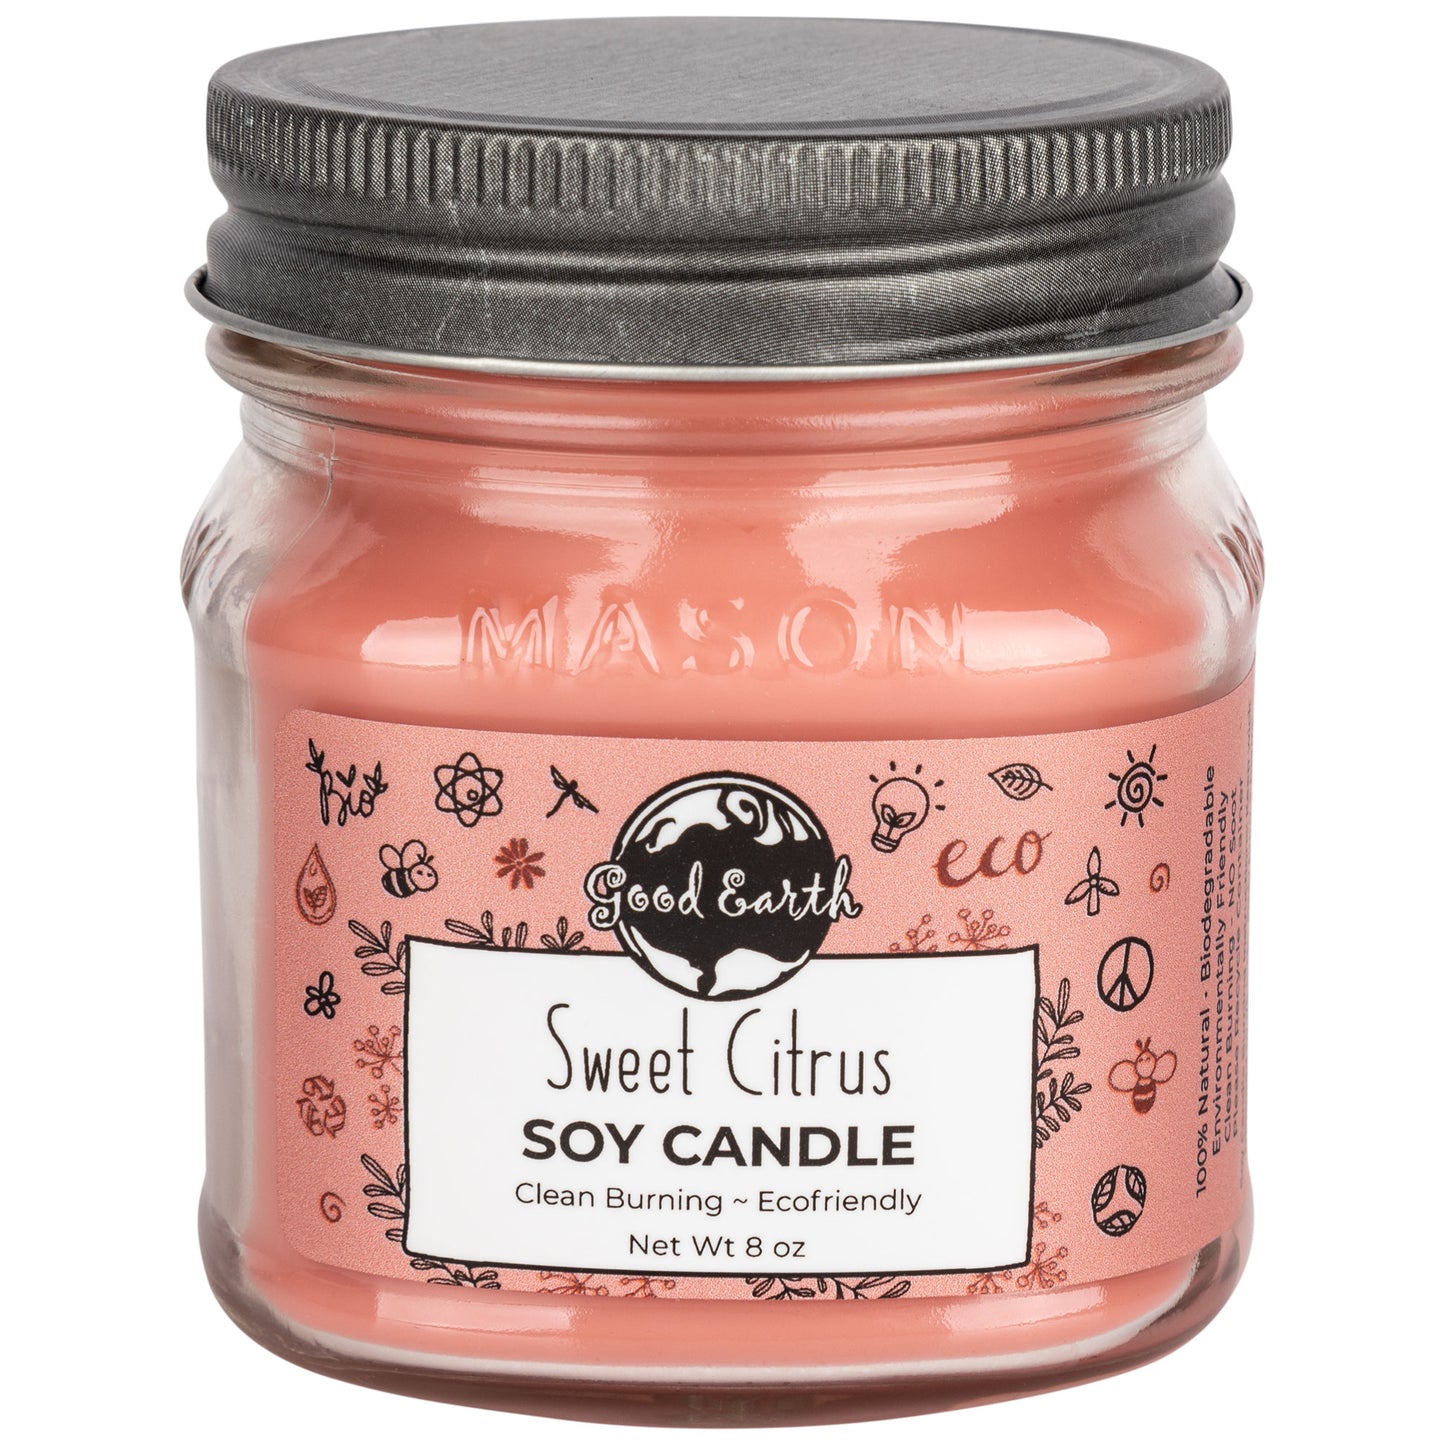 Good Earth Soy Candle